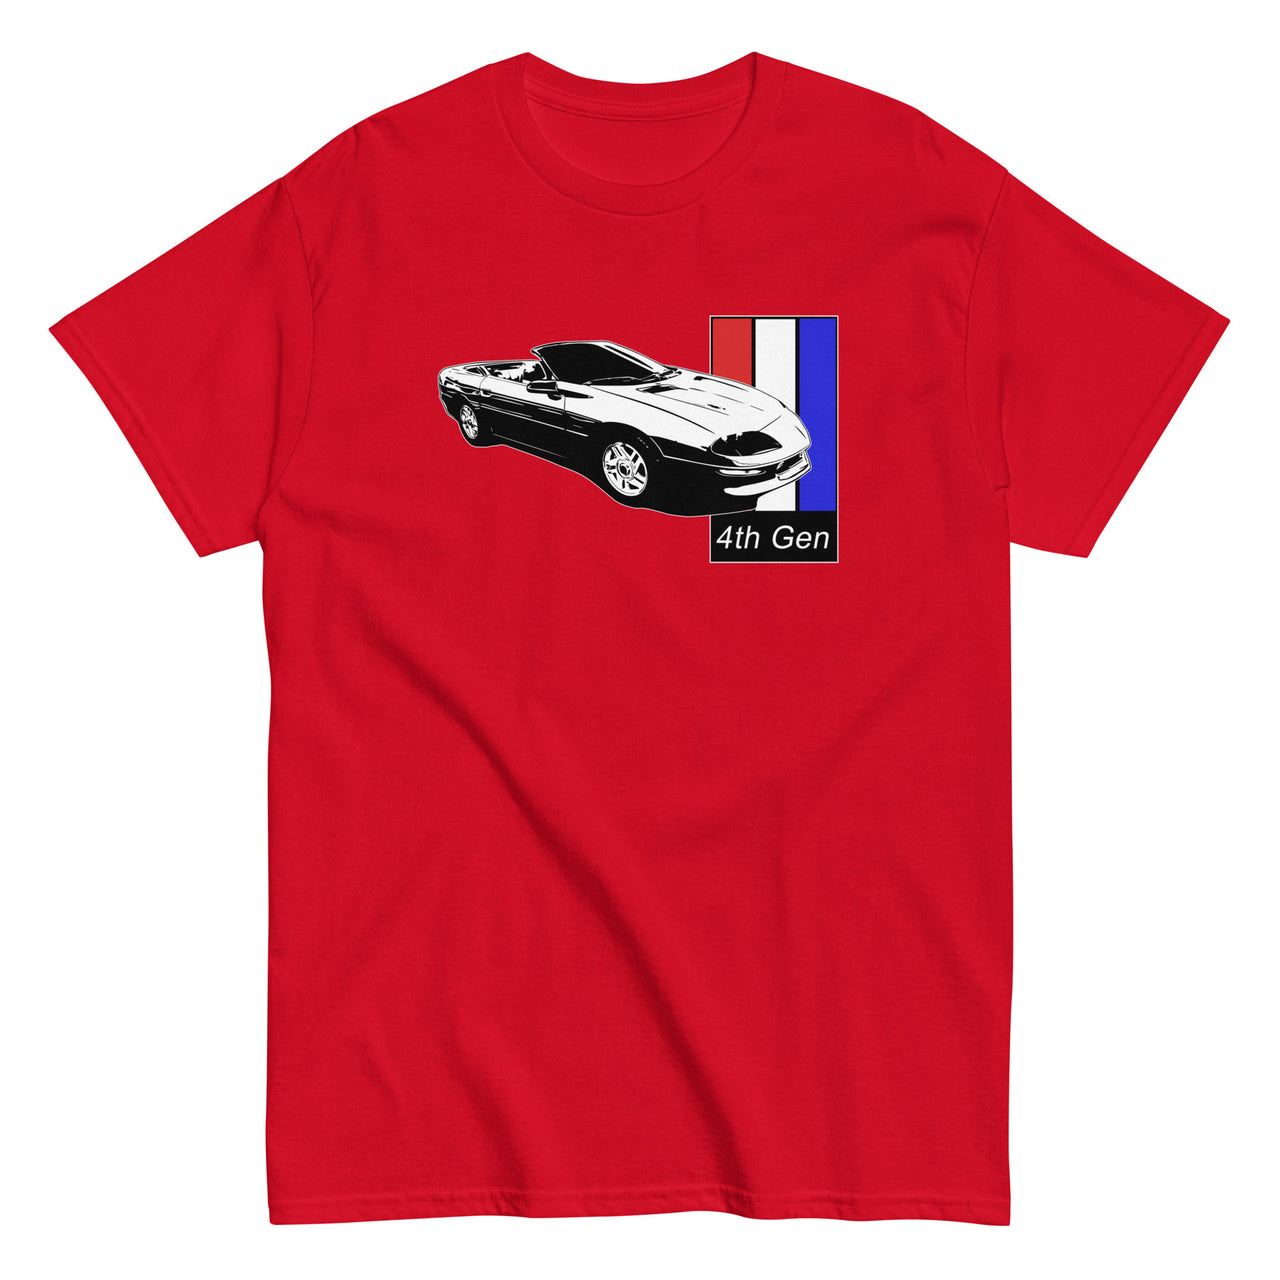 4th Gen Camaro Convertible T-Shirt in red